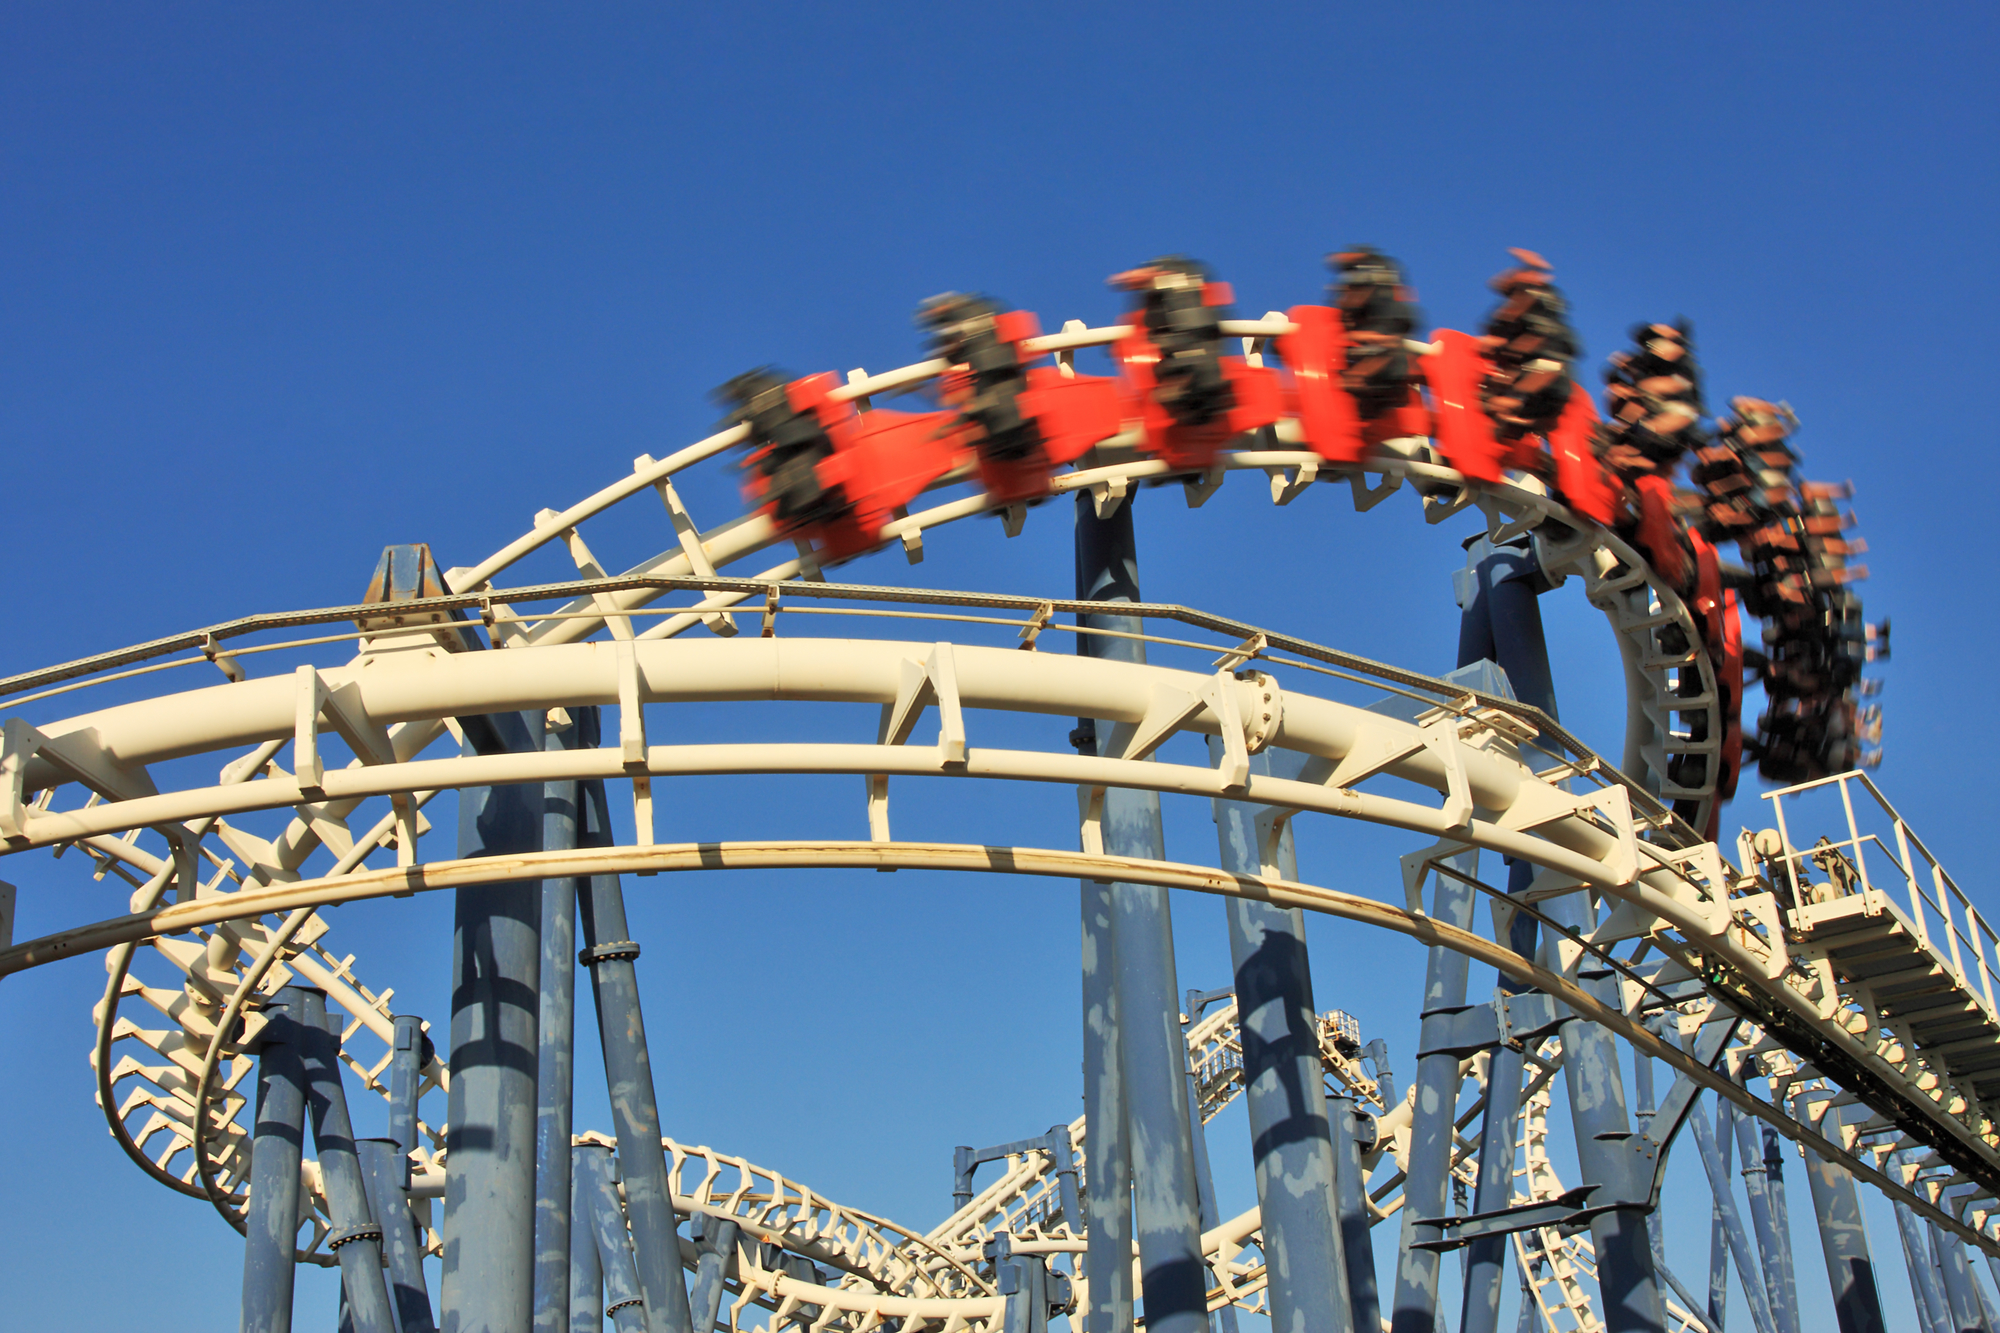 What actually qualifies as a roller coaster? - In The Loop